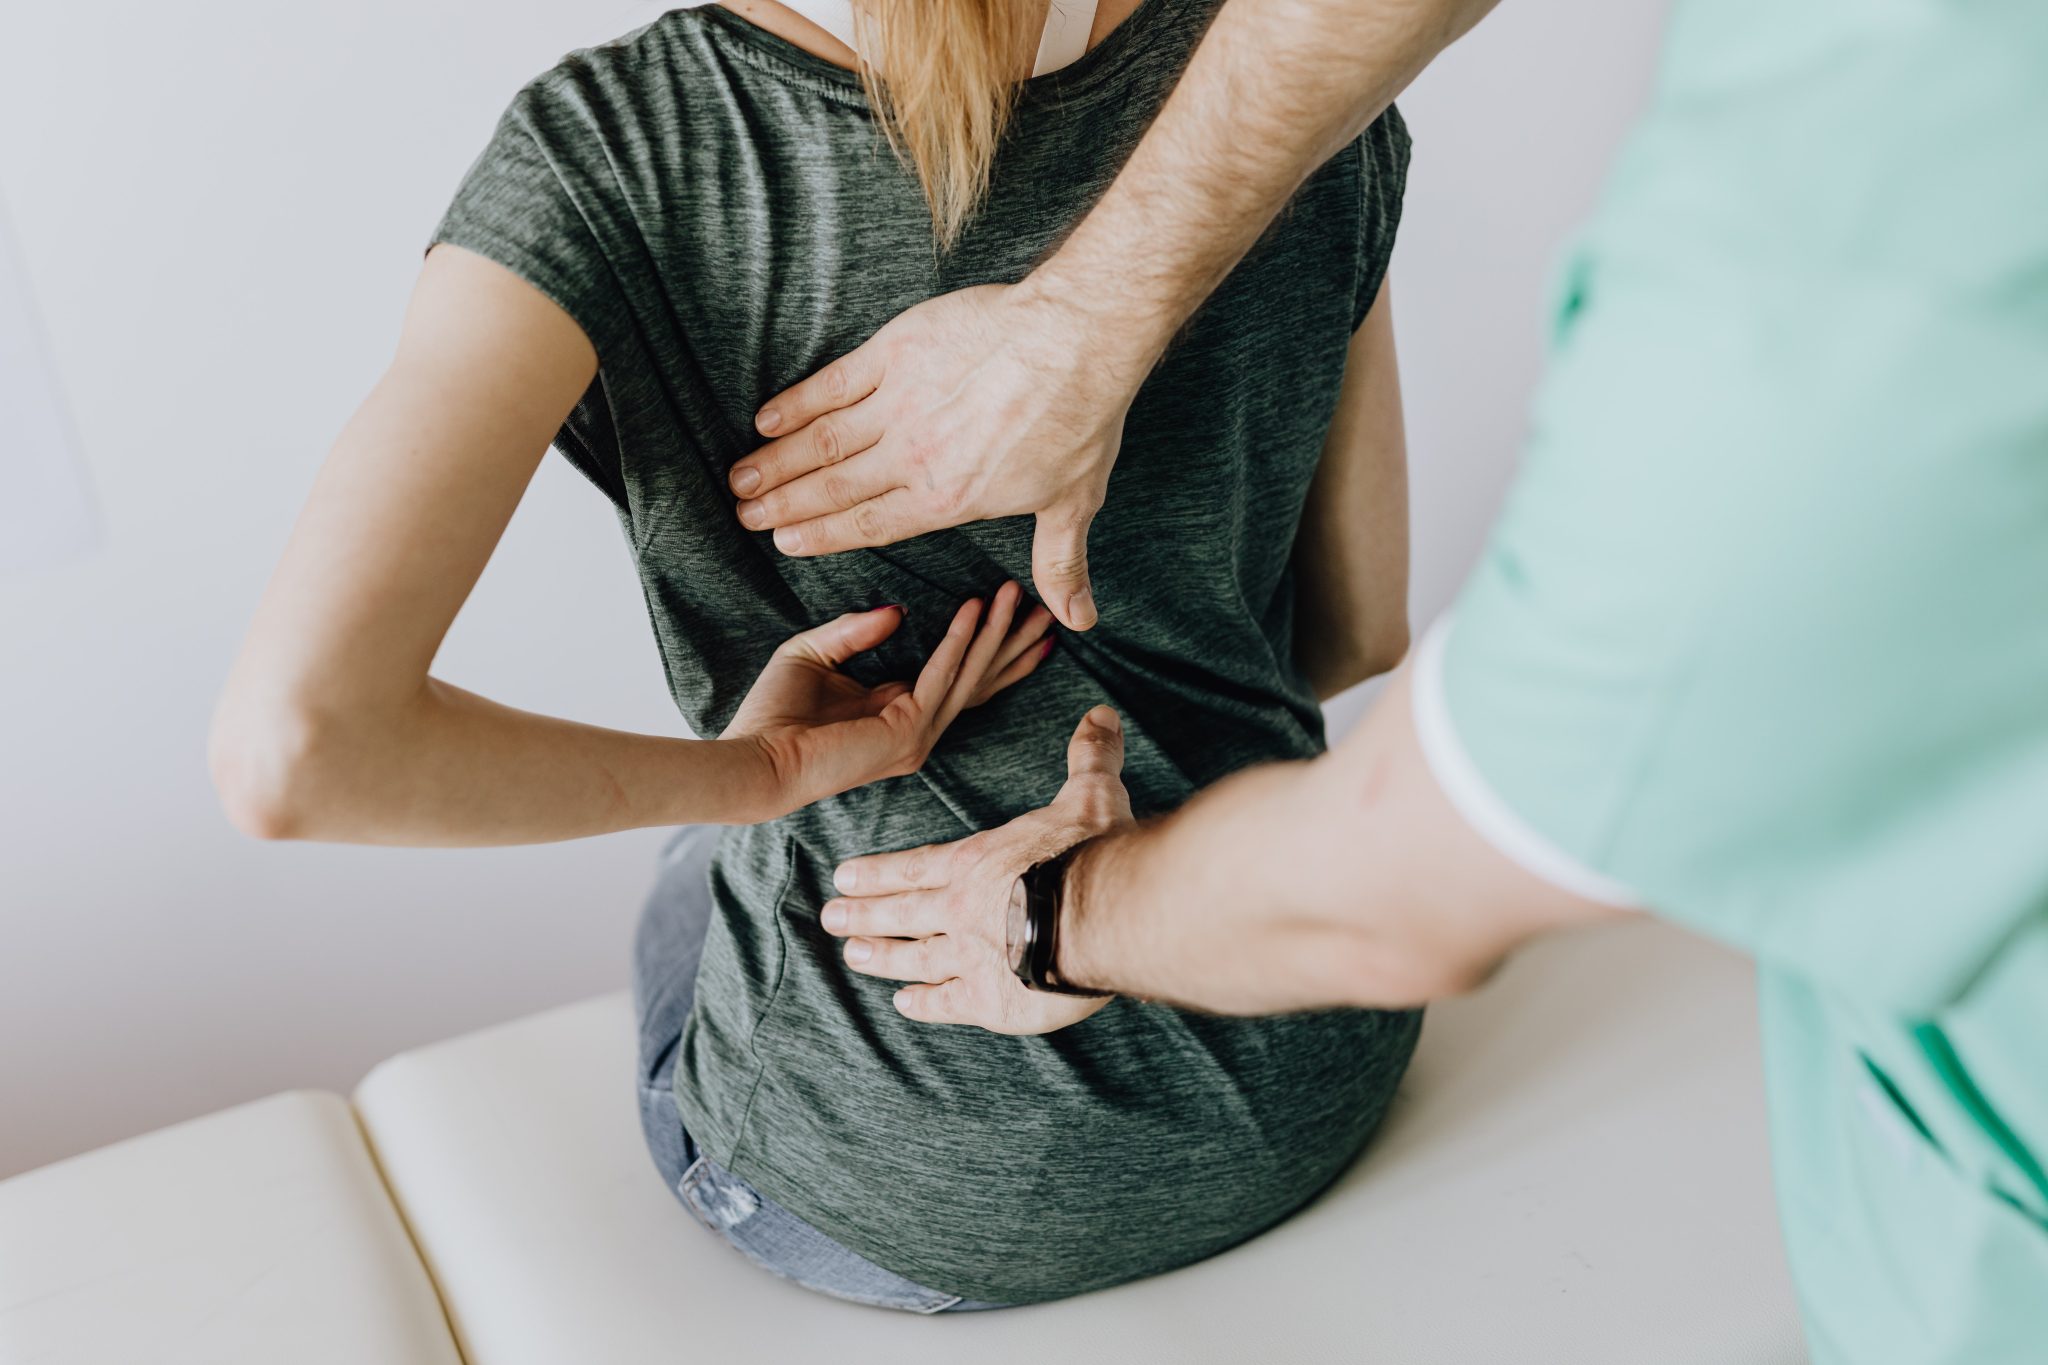 Is a chiropractor hip adjustment the solution for hip pain? Find out how chiropractic care in Southampton and Ferndown can relieve chiropractic hip pain.